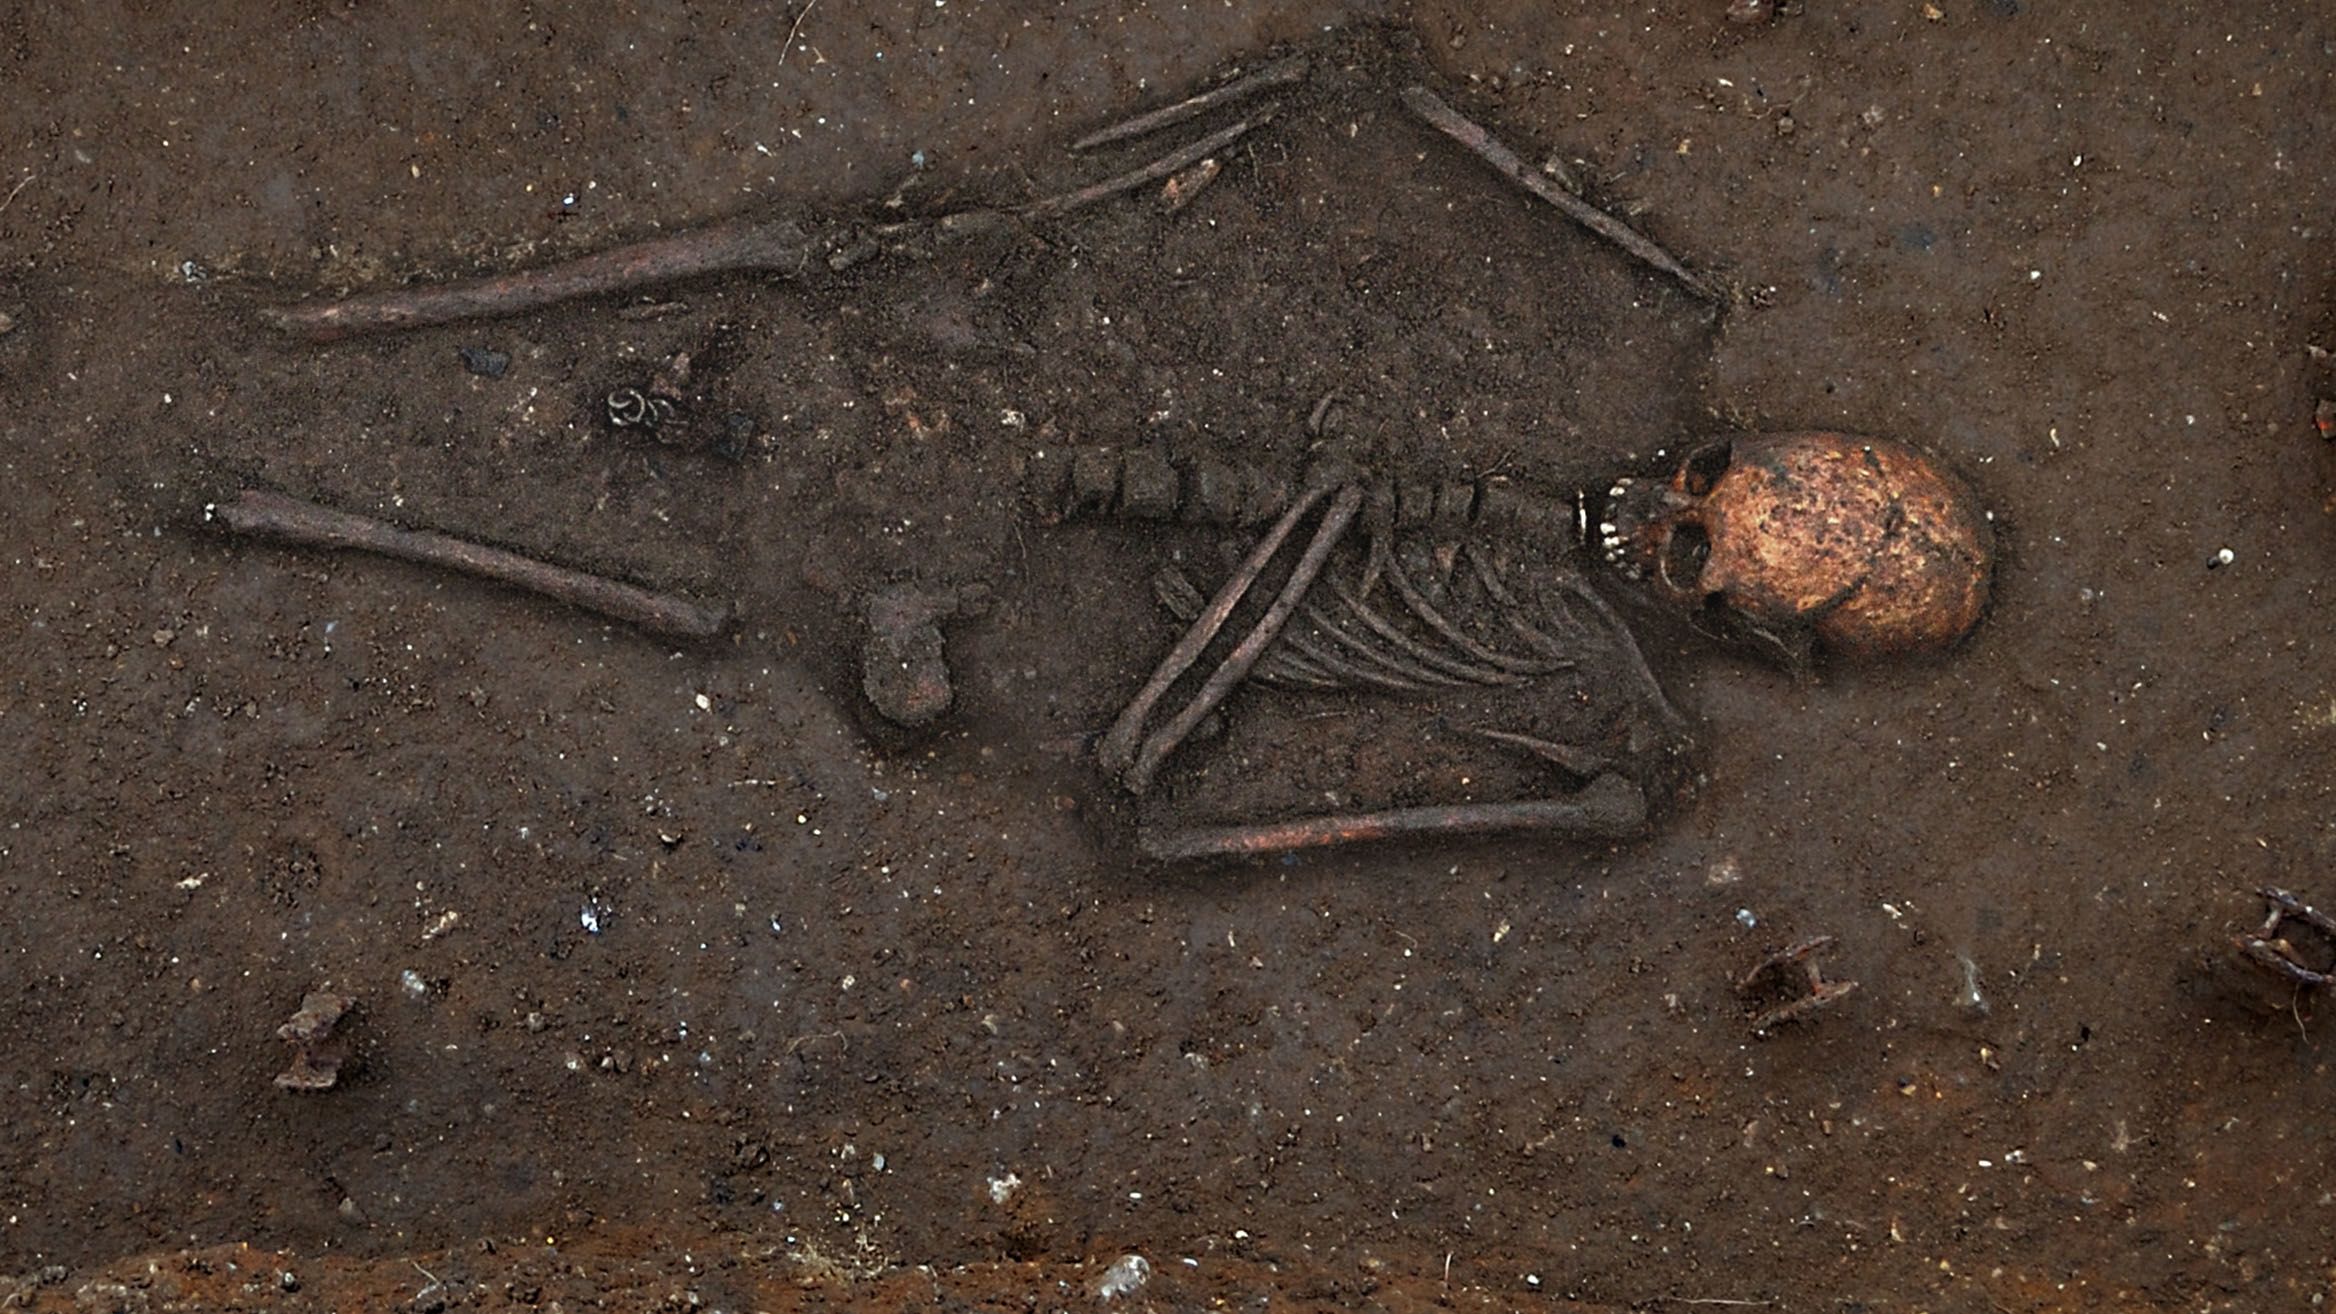 Trumpington bed burial composite image. Courtesy of University of Cambridge Archaeological Unit